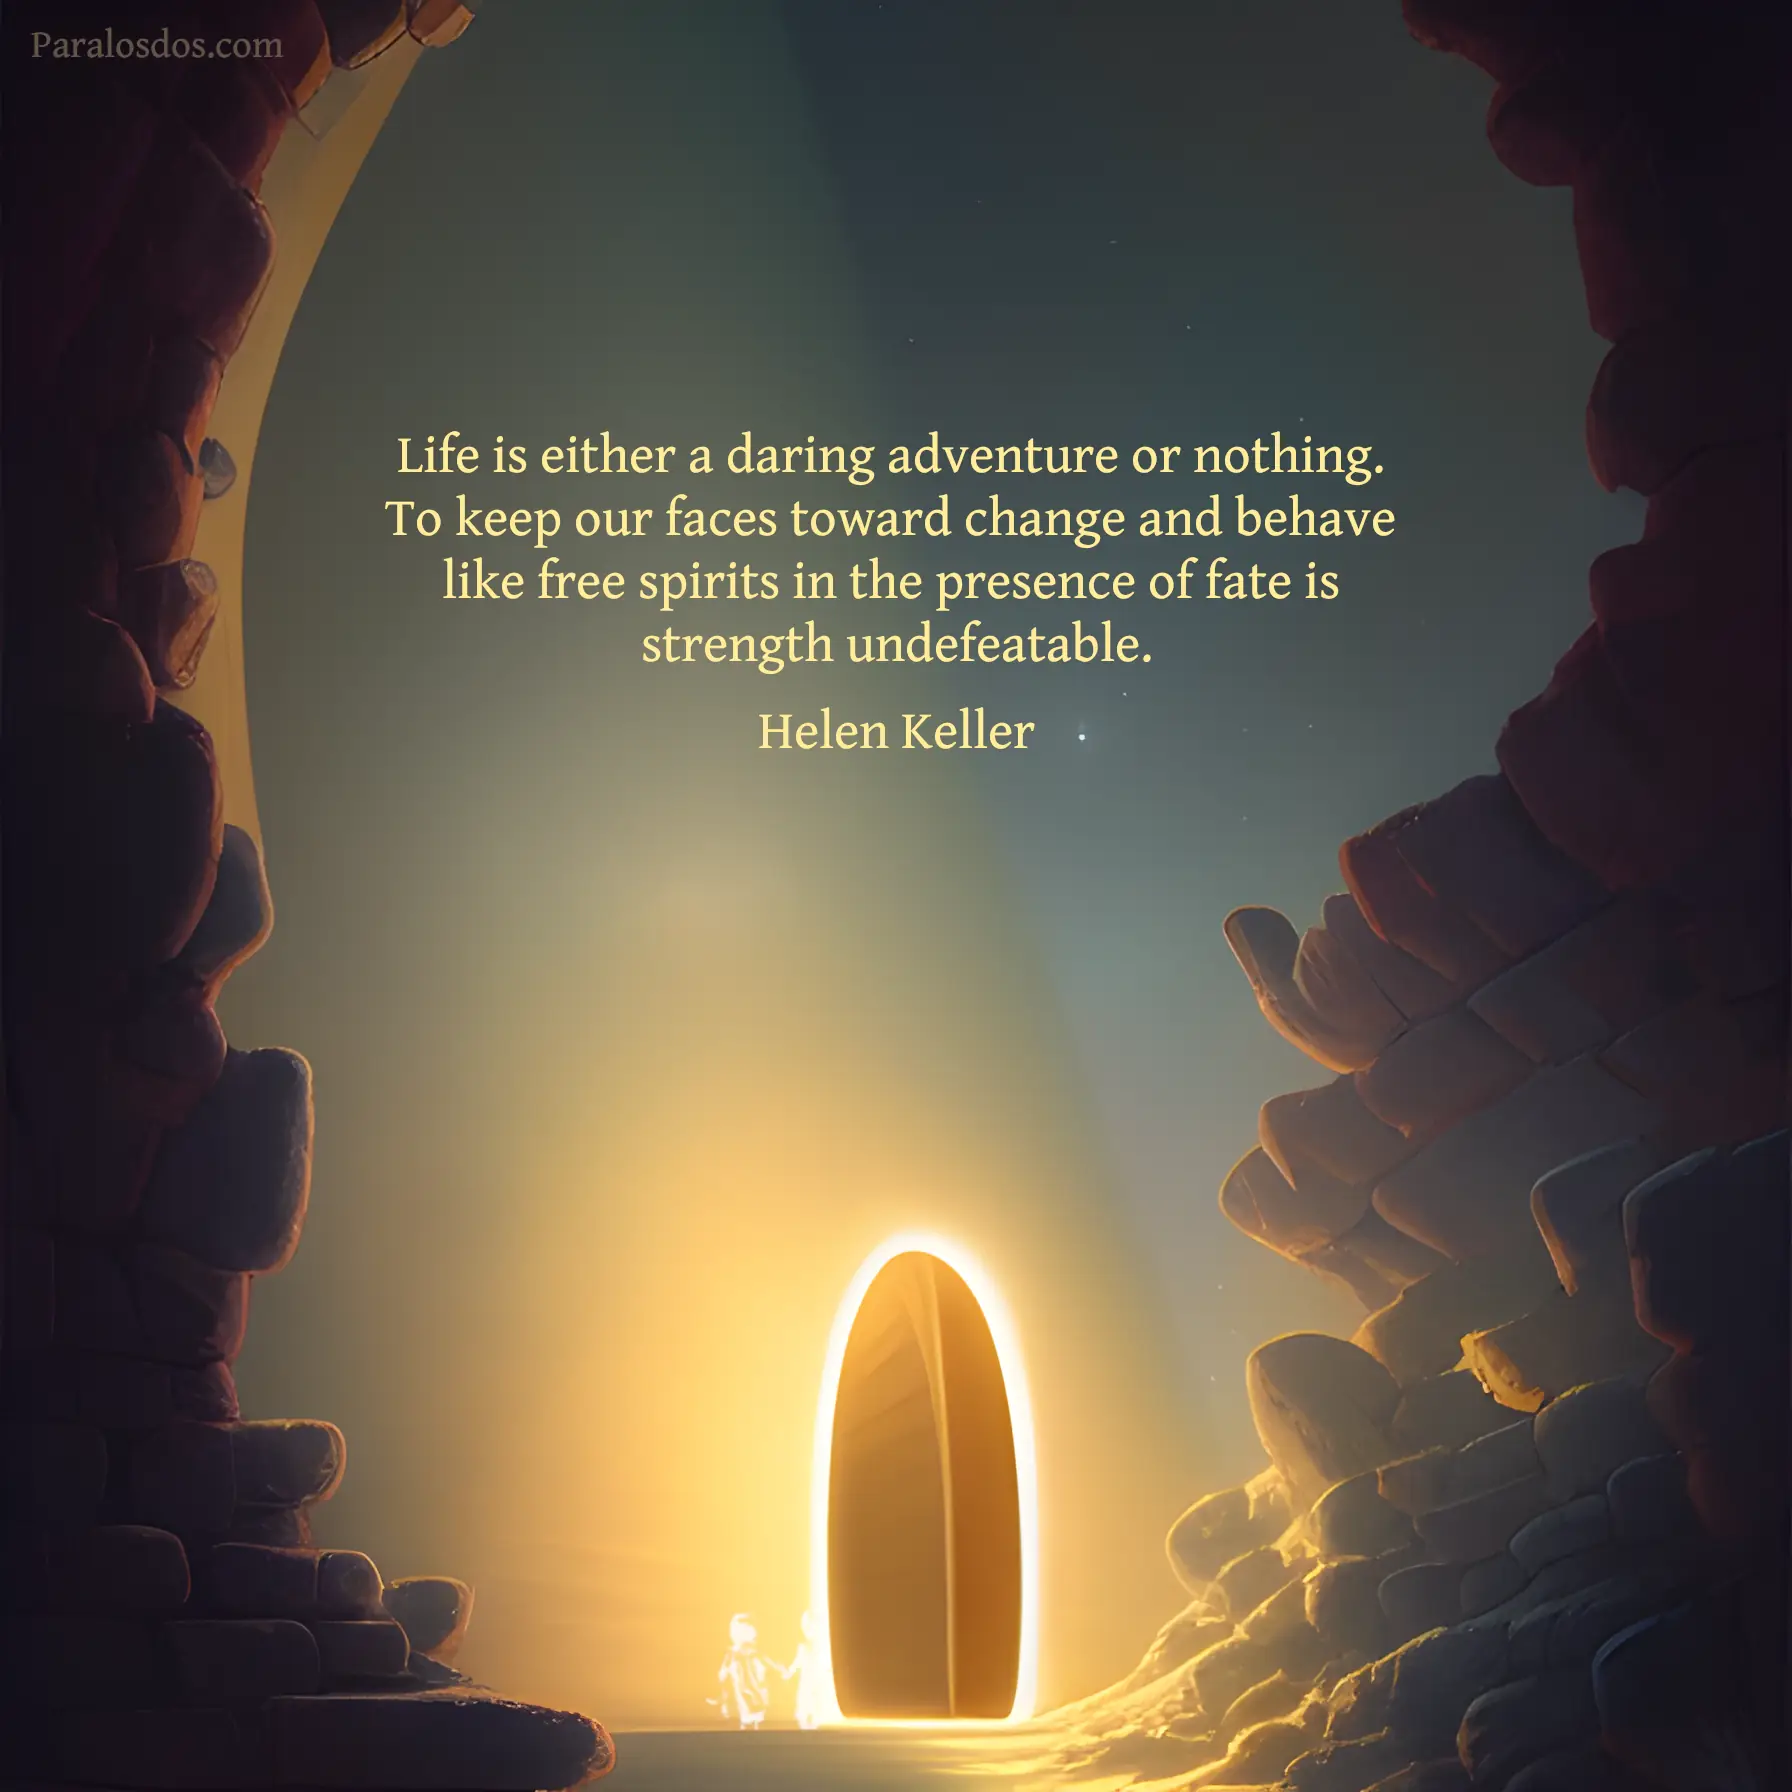 An artistic rendering of a doorway surrounded by a halo of light. The quote reads: "Life is either a daring adventure or nothing. To keep our faces toward change and behave like free spirits in the presence of fate is strength undefeatable." Helen Keller